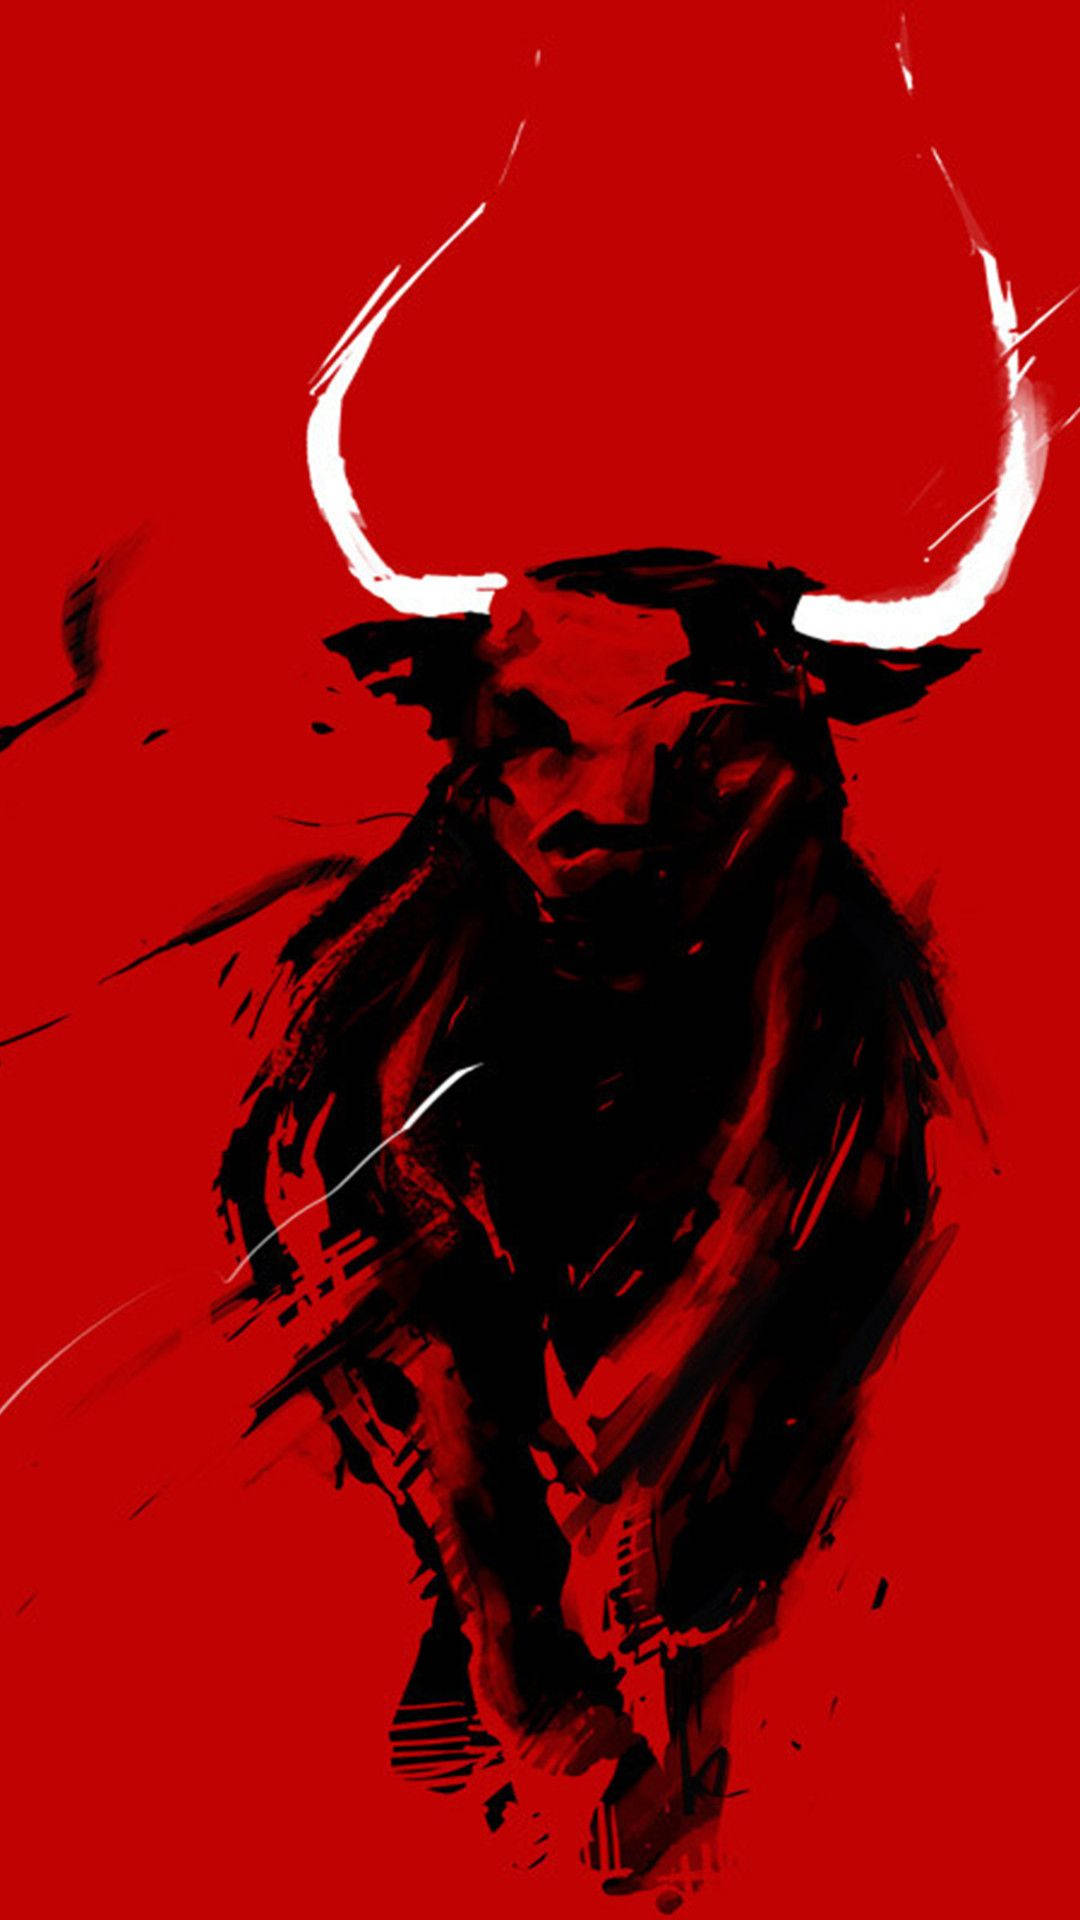 Chicago Bulls 1080X1920 Wallpaper and Background Image